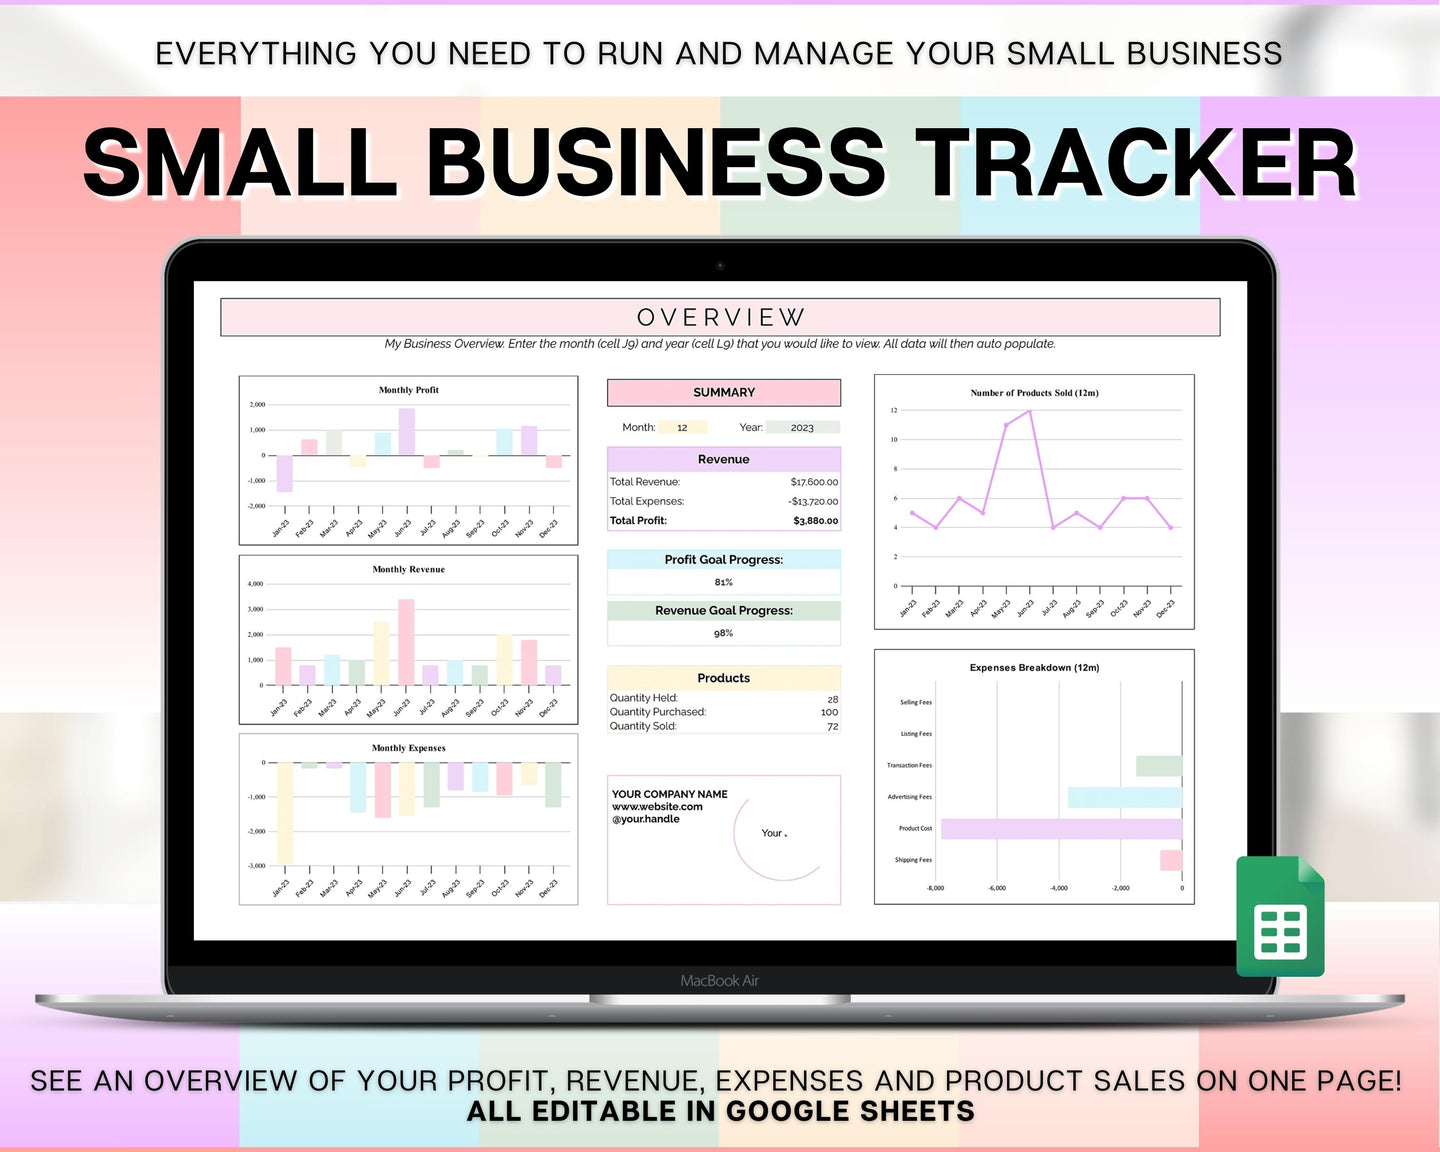 Small Business Bookkeeping Spreadsheet | Google Sheets Automated Business Expense Tracker & Product Invetory Tracker | Rainbow